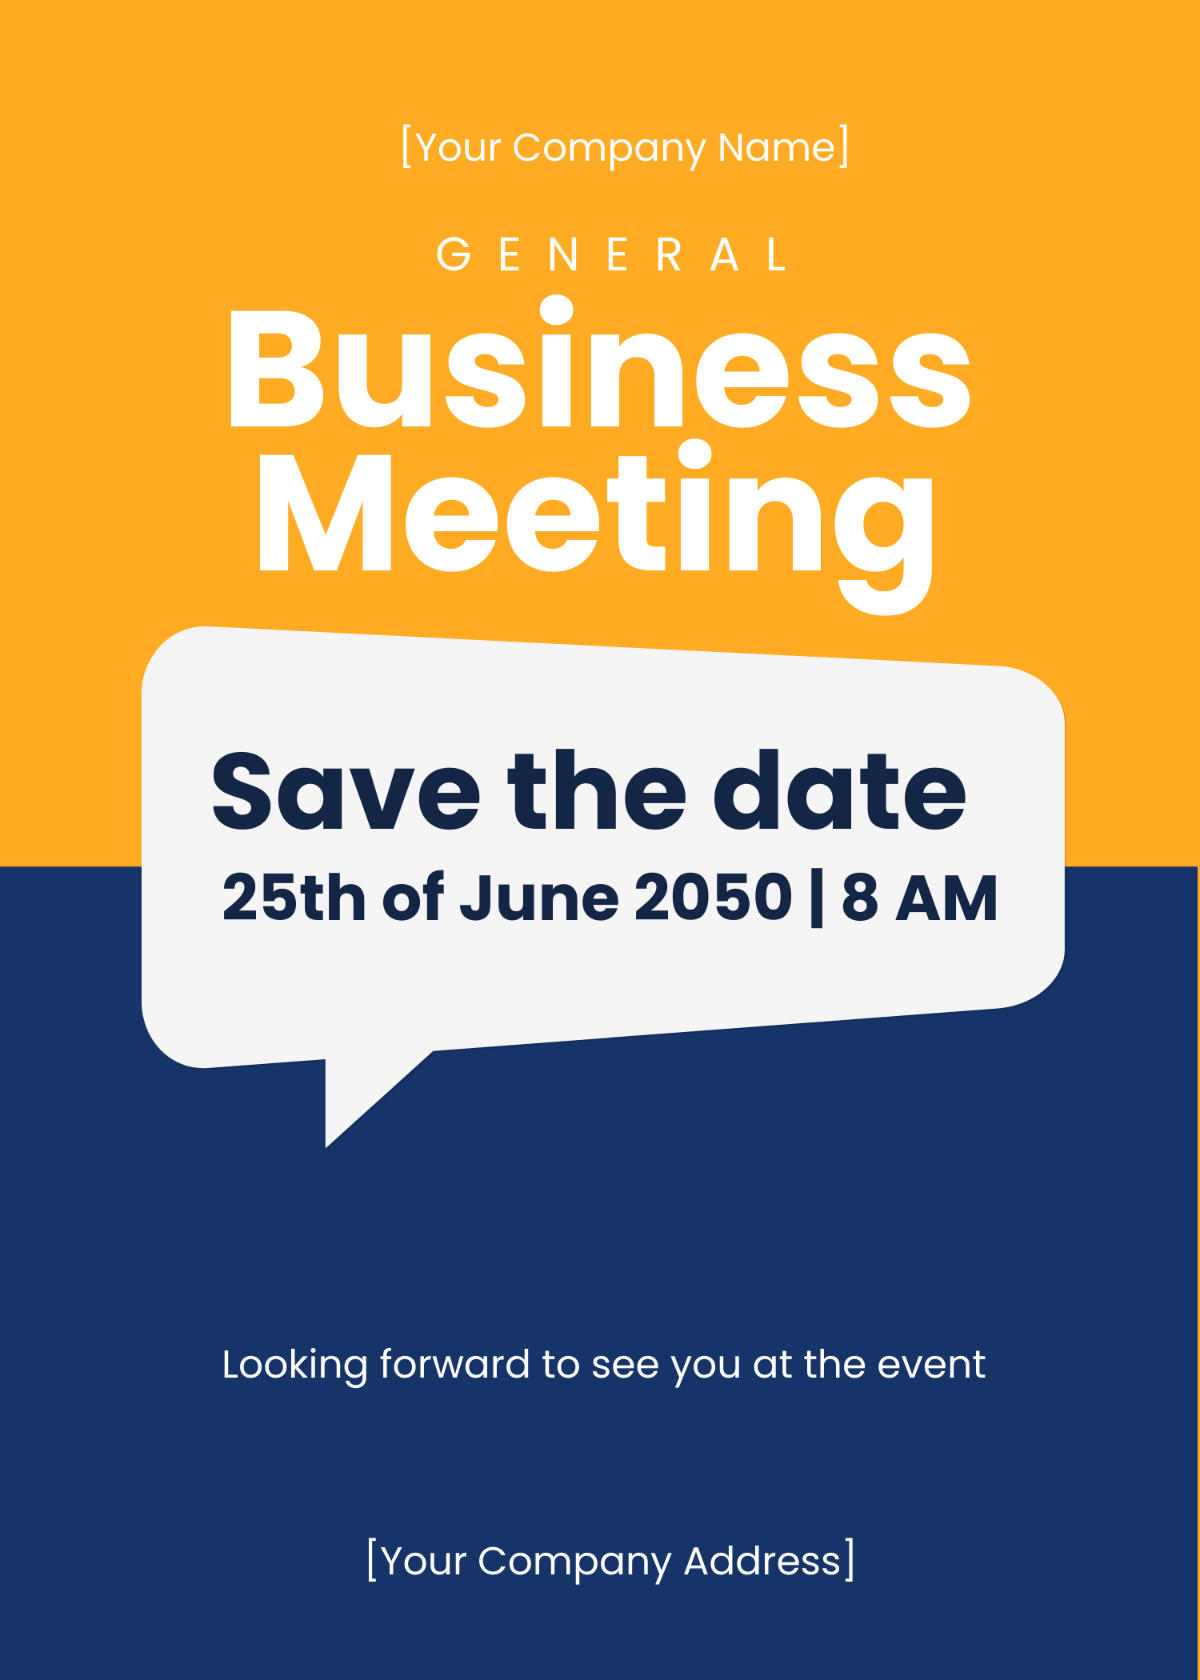 Save the Date Meeting Invitation